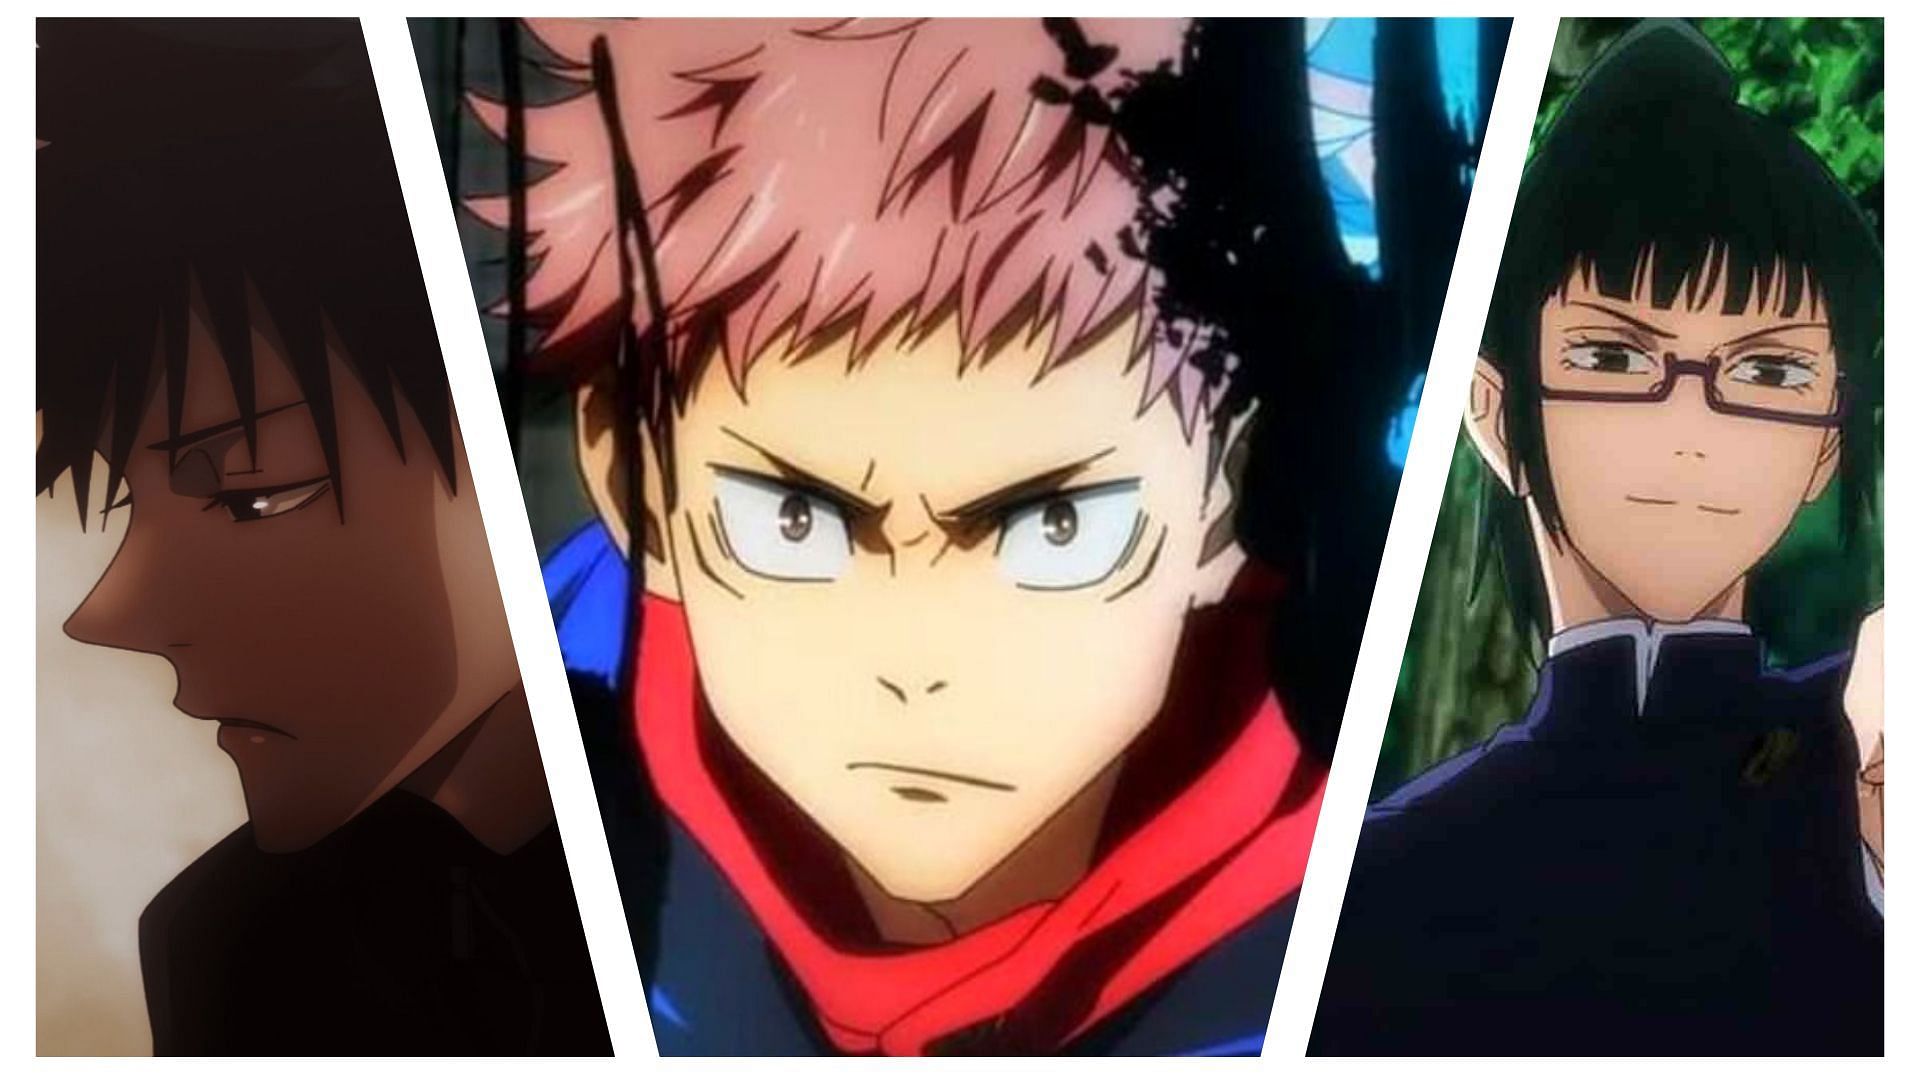 The central characters in Jujutsu Kaisen chapter 215 (Image via Mappa)